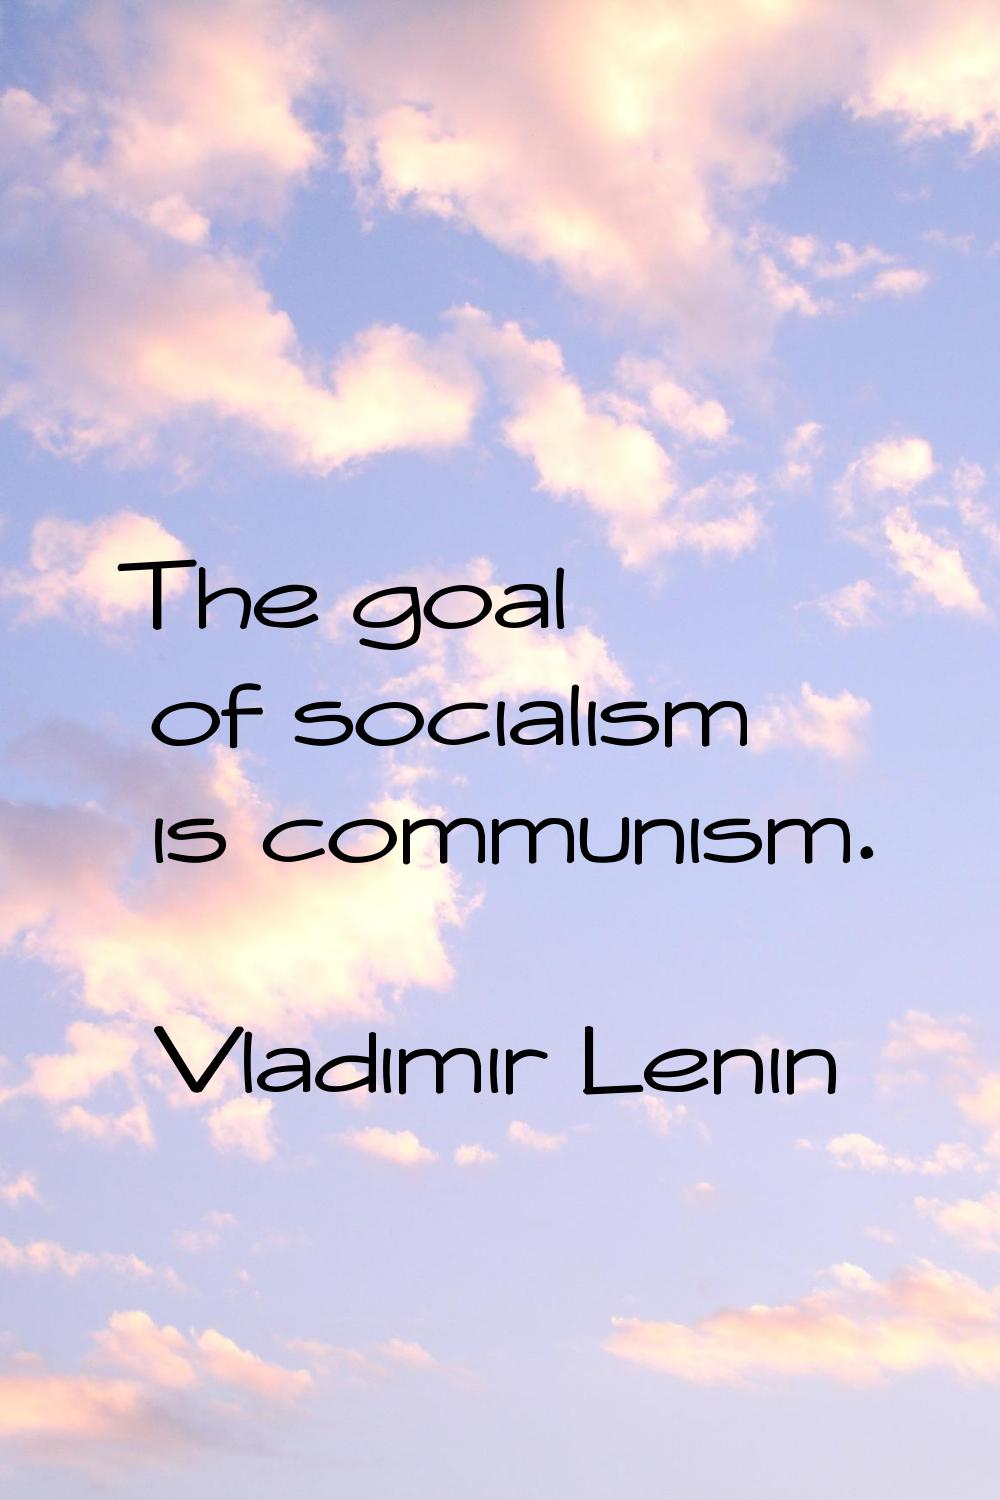 The goal of socialism is communism.